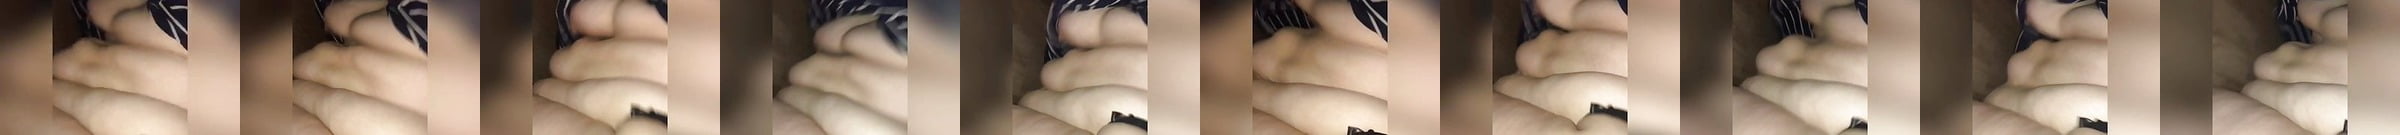 Bbw Wife Fucked From Behind Huge Swinging Tits Hd Porn 32 Xhamster 